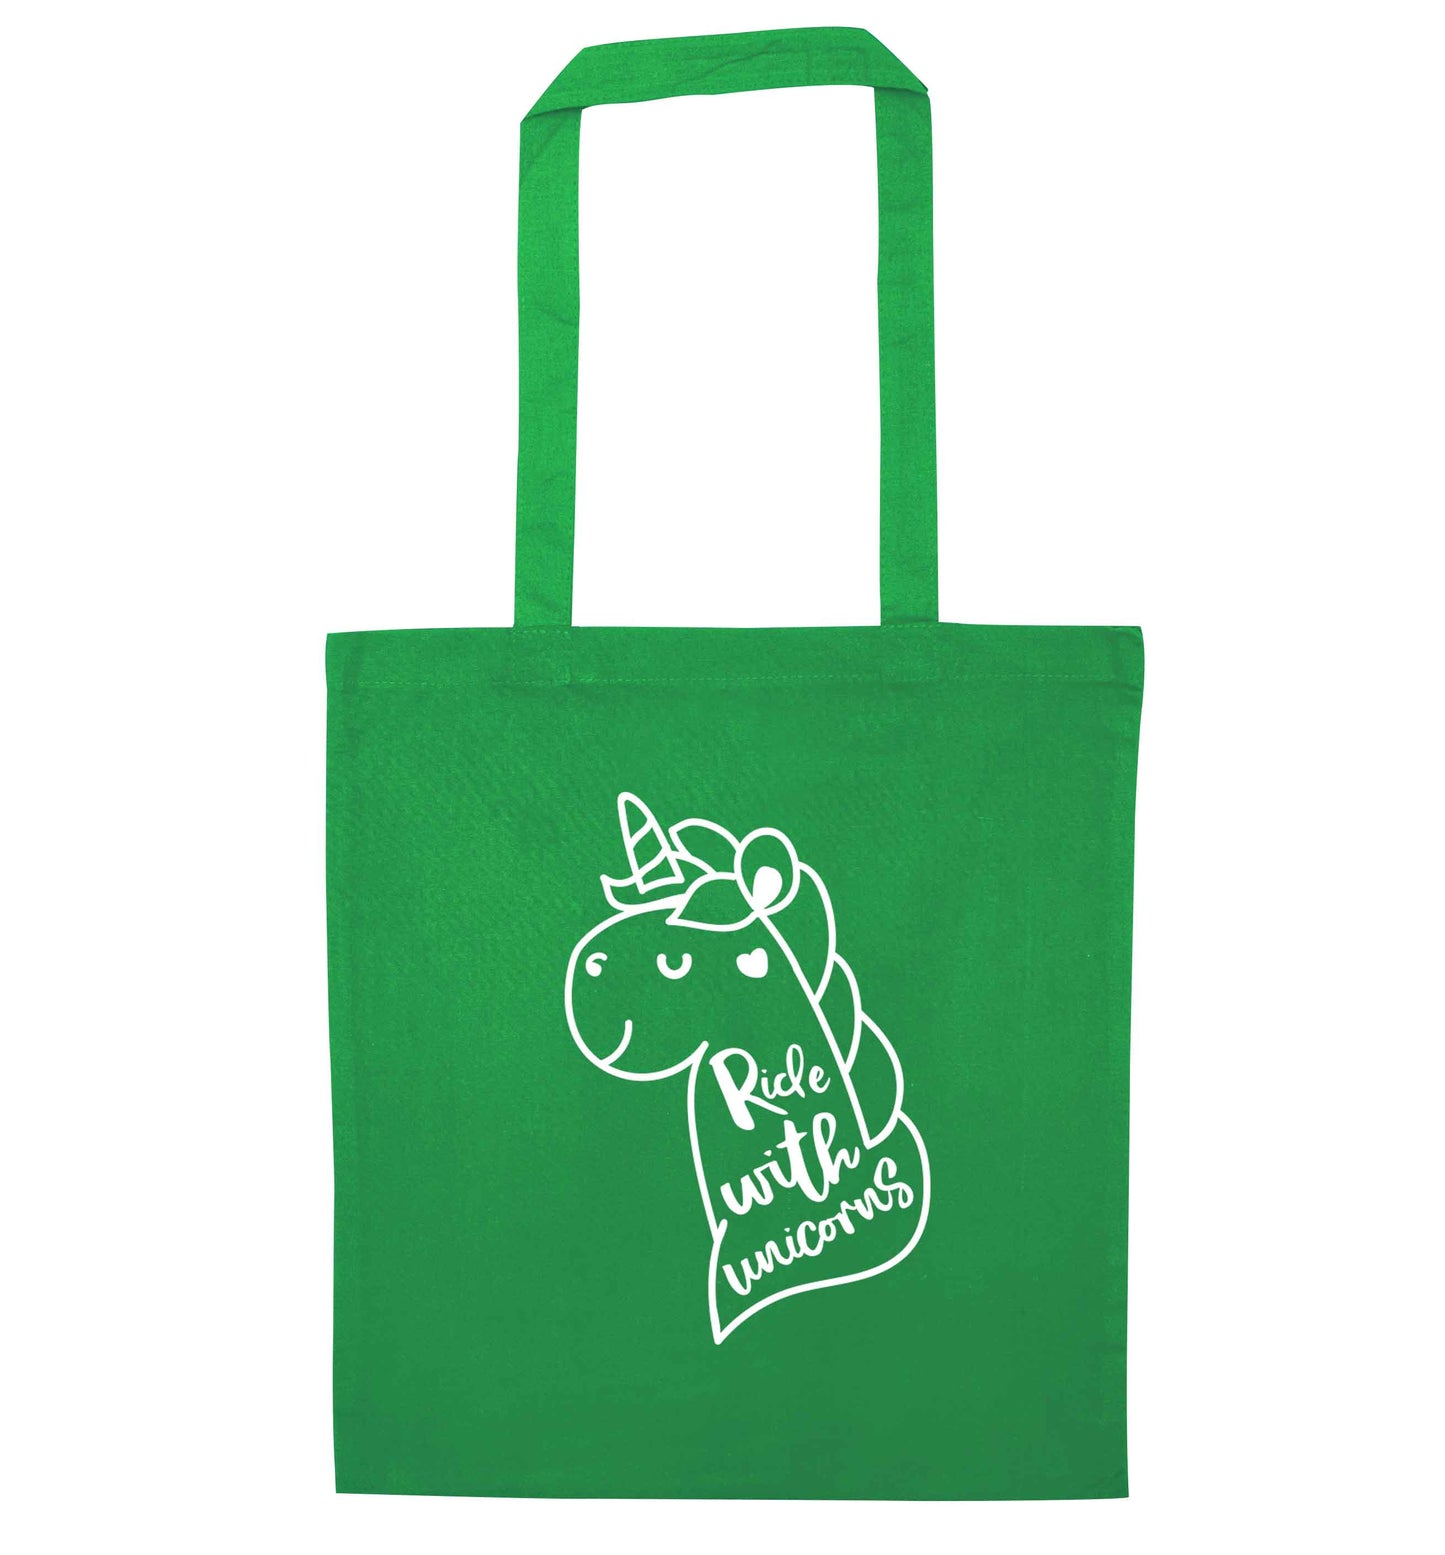 Ride with unicorns green tote bag